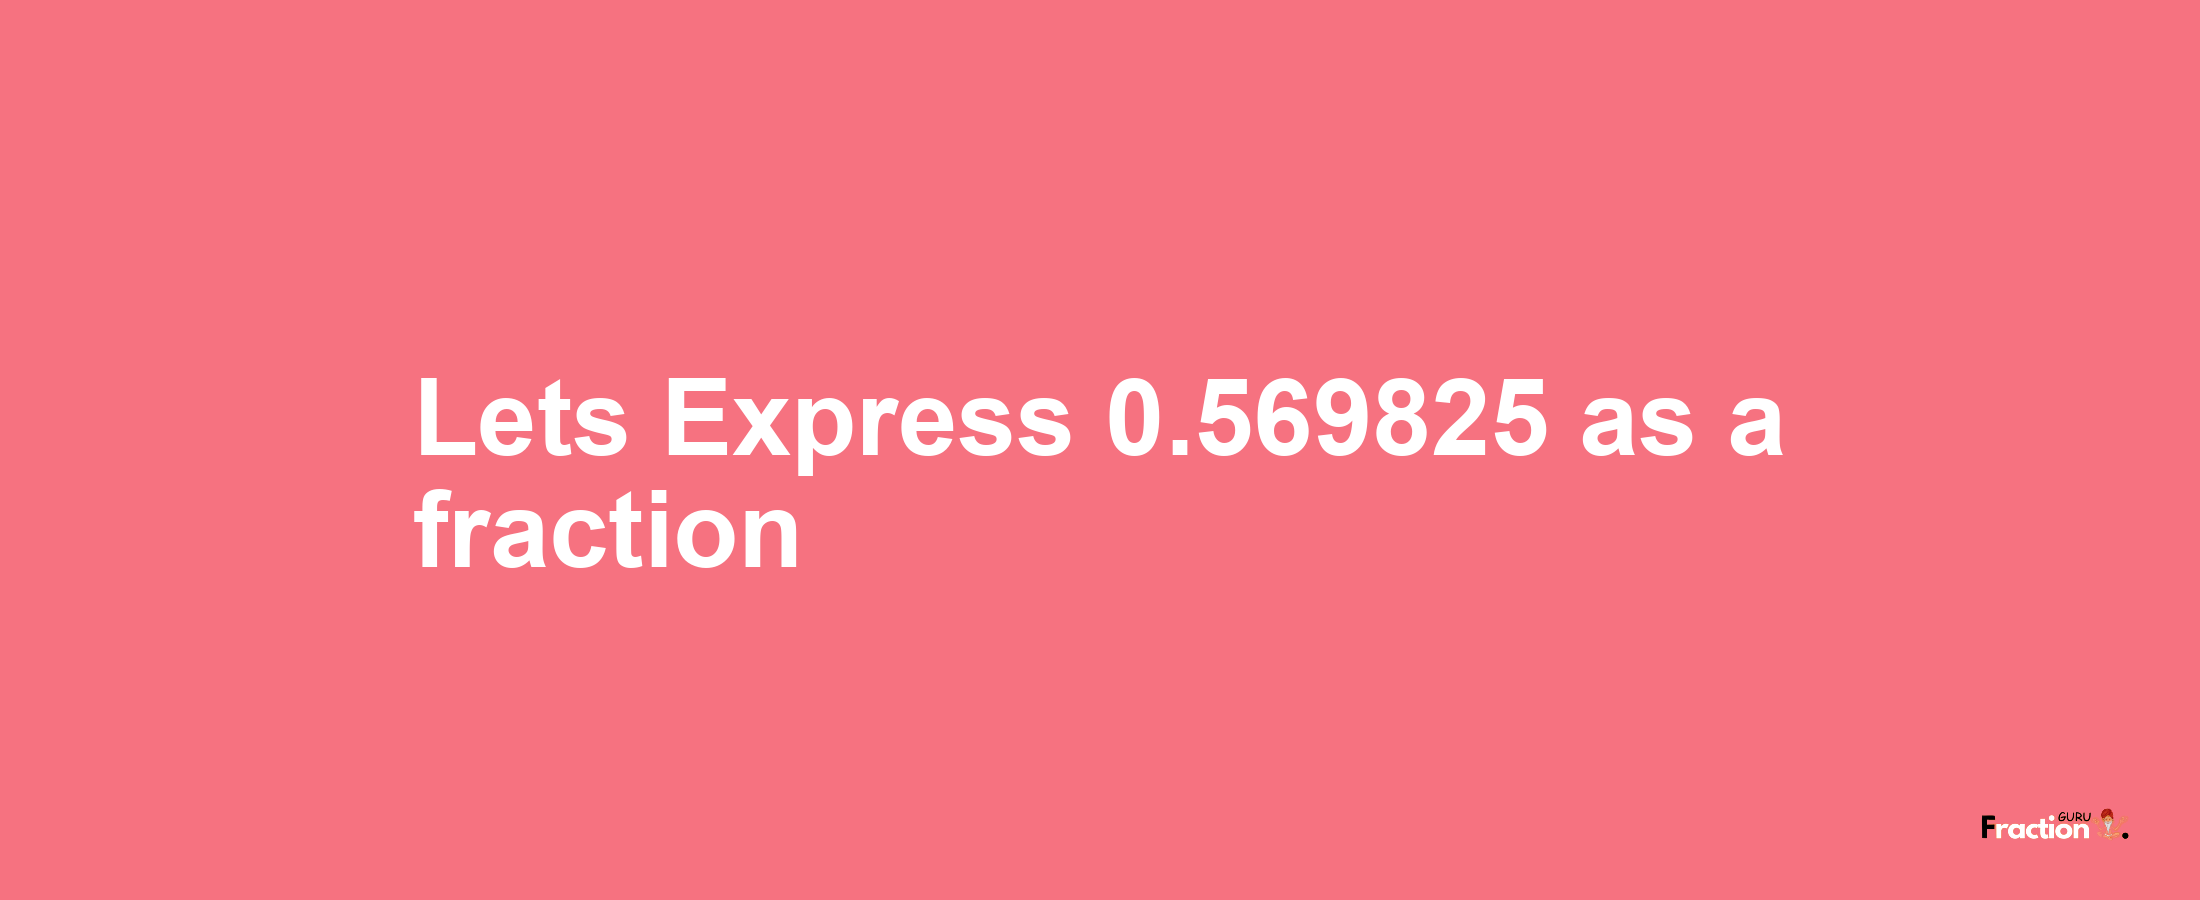 Lets Express 0.569825 as afraction